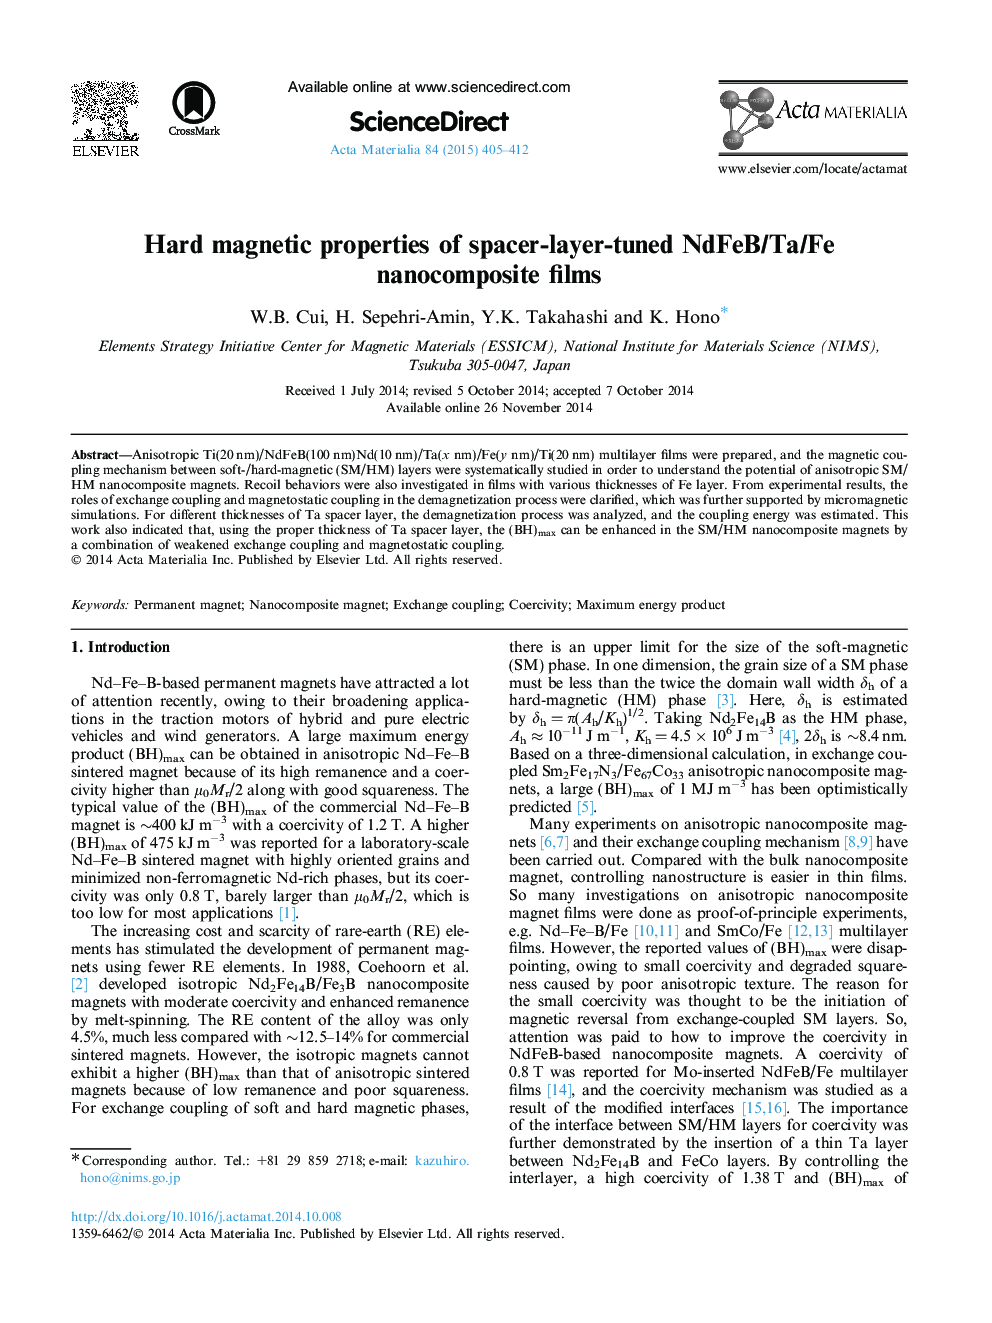 Hard magnetic properties of spacer-layer-tuned NdFeB/Ta/Fe nanocomposite films